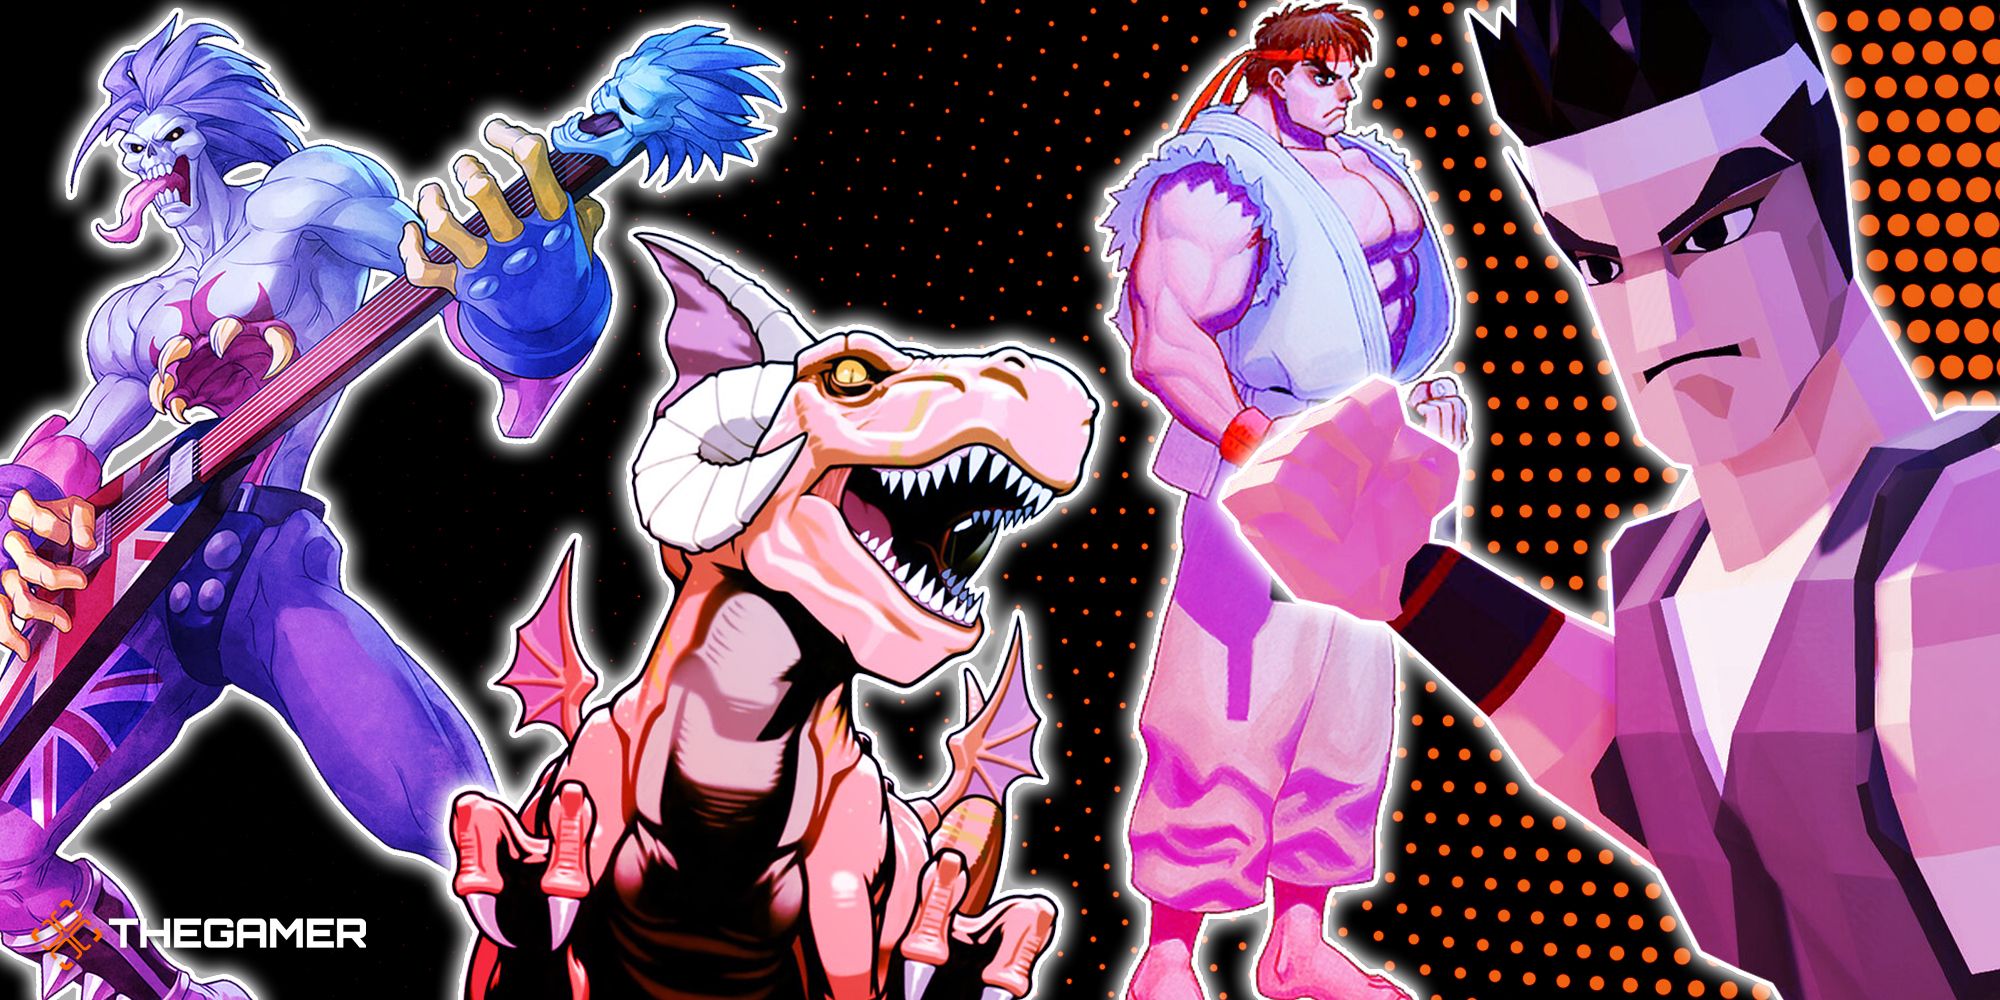 Art from Darkstalkers, Red Earth (Fighting Evolution,) Street Fighter 2 and Virtual Fighter.